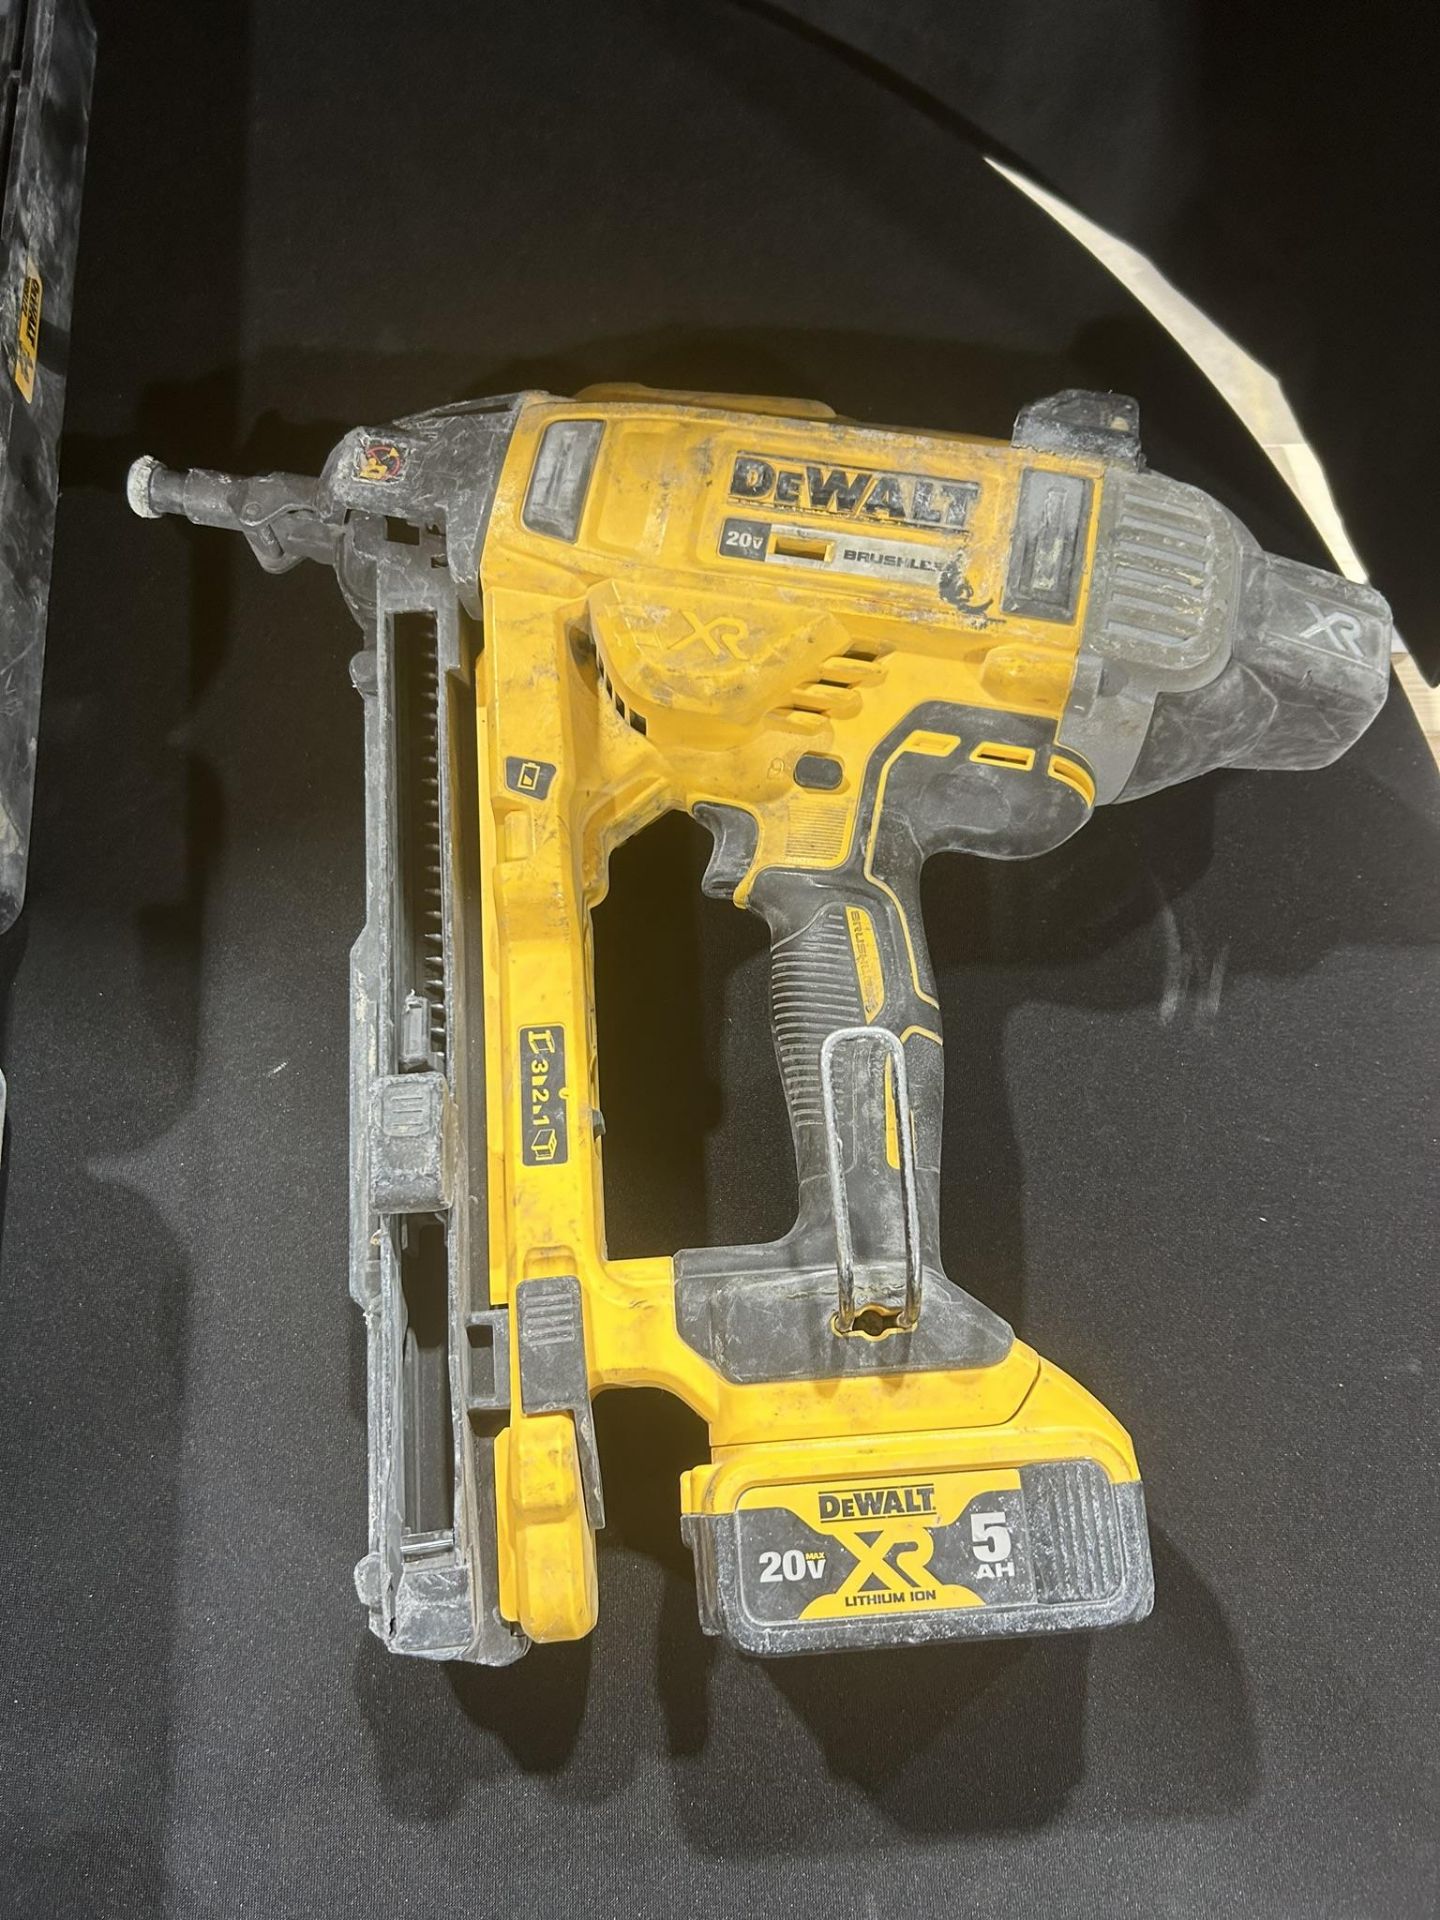 DEWALT DCN891 CORDLESS CONCRETE NAILER W/ BATTERY AND CHARGER - Image 2 of 8